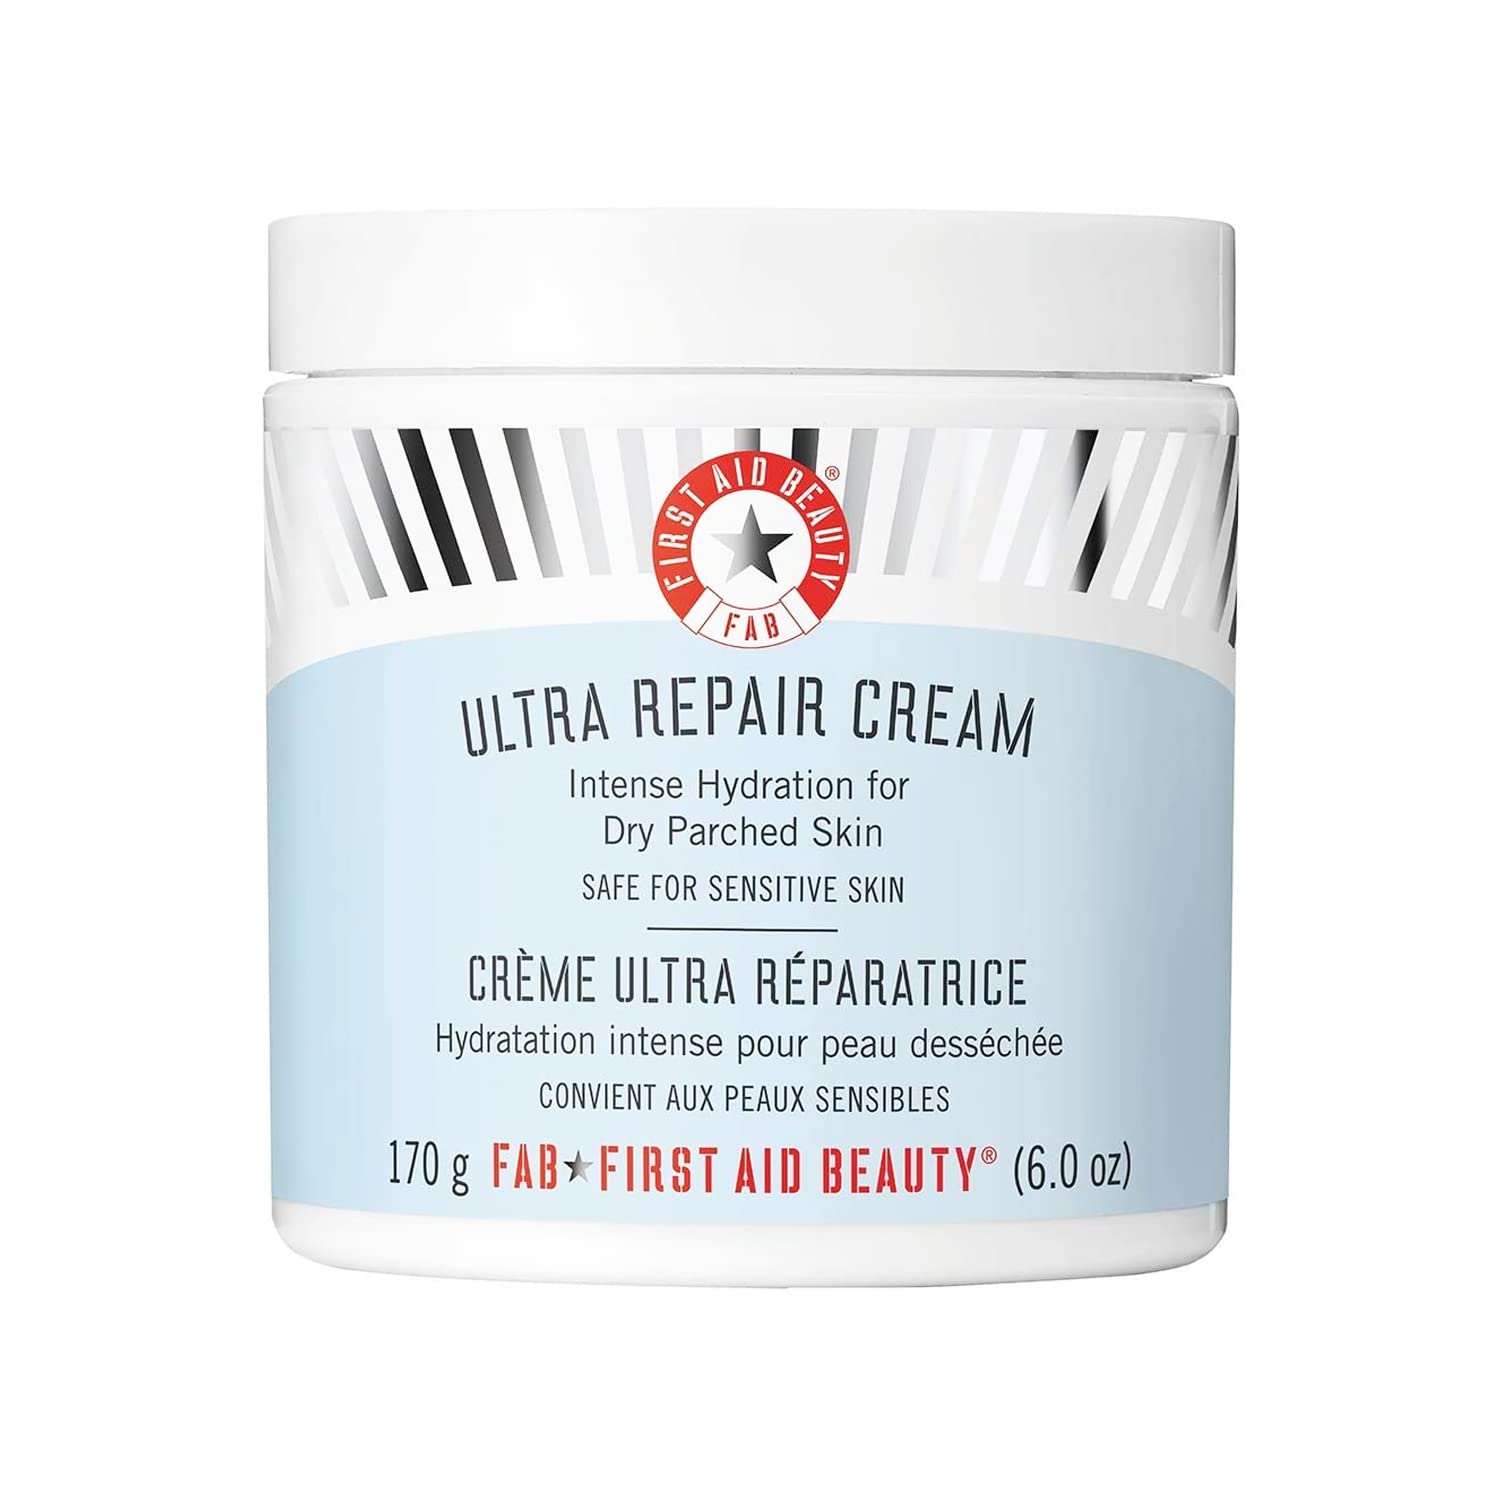 First Aid Beauty Ultra Repair Cream Intense Hydration Moisturiser for Face and Body - 6 oz.